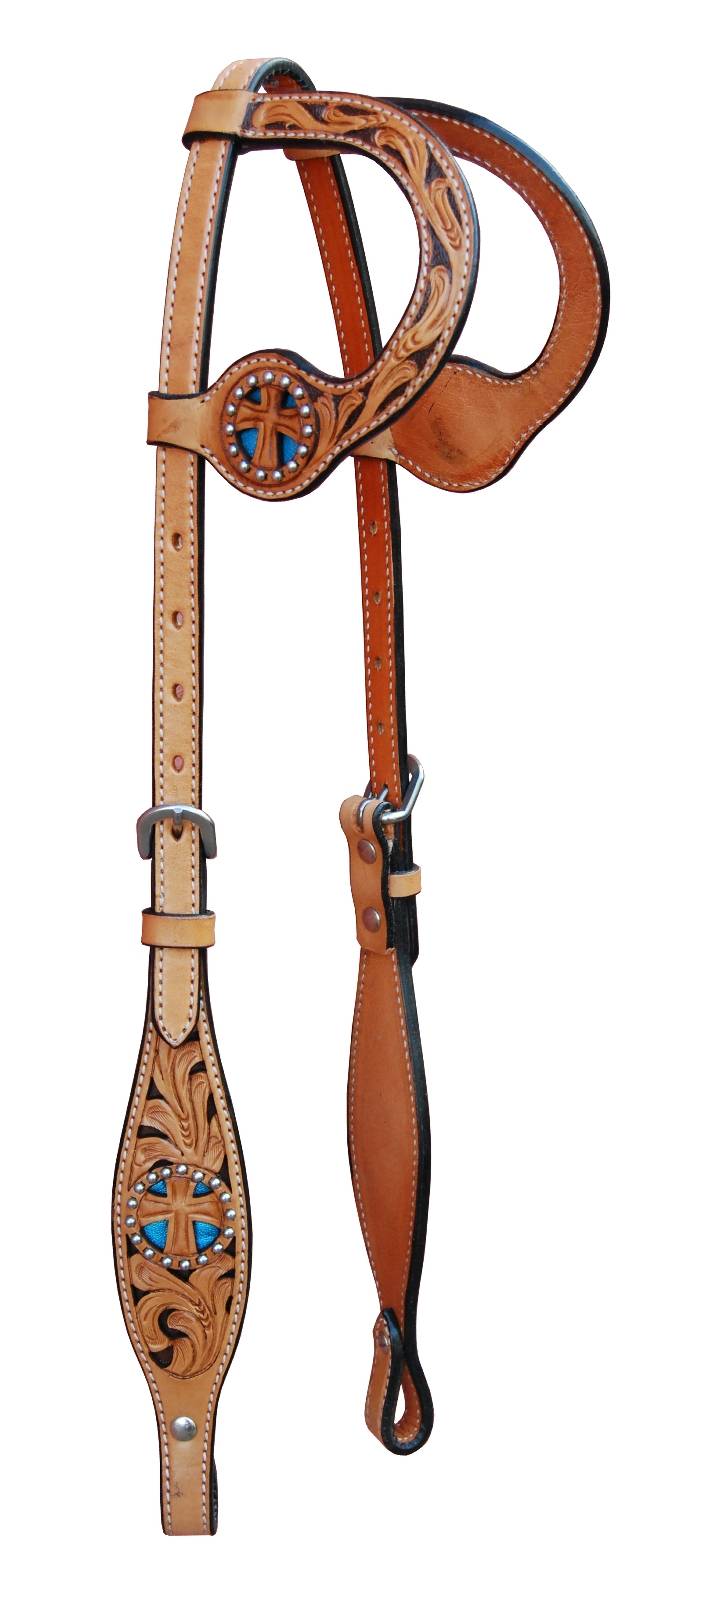 Turn-Two Double Ear Headstall - St. Christopher